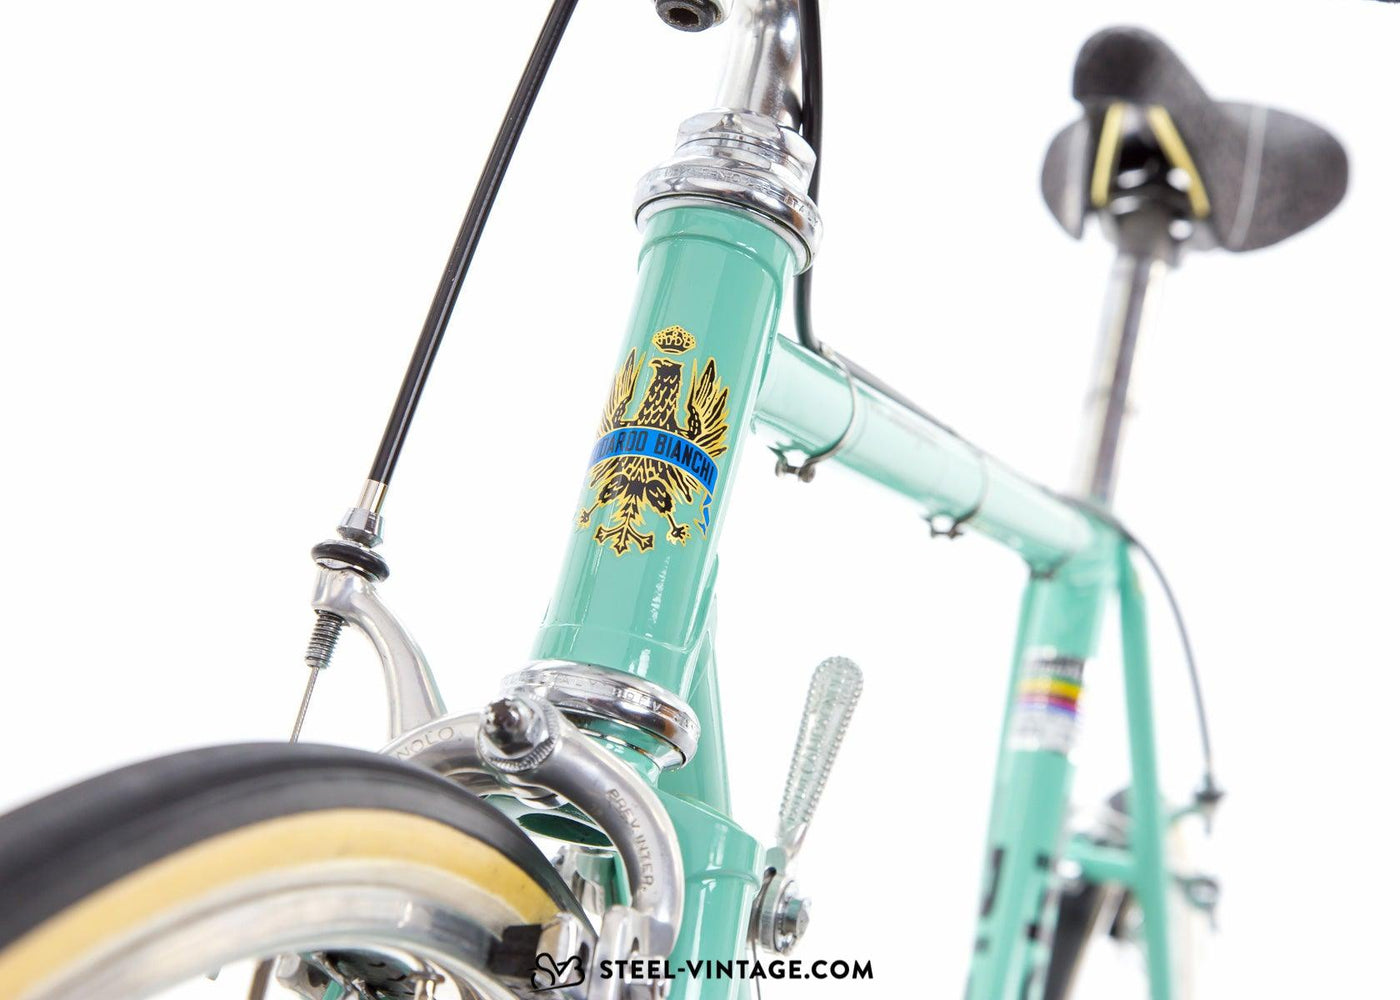 Bianchi Specialissima Professionale Classic Road Bicycle 1970s - Steel Vintage Bikes